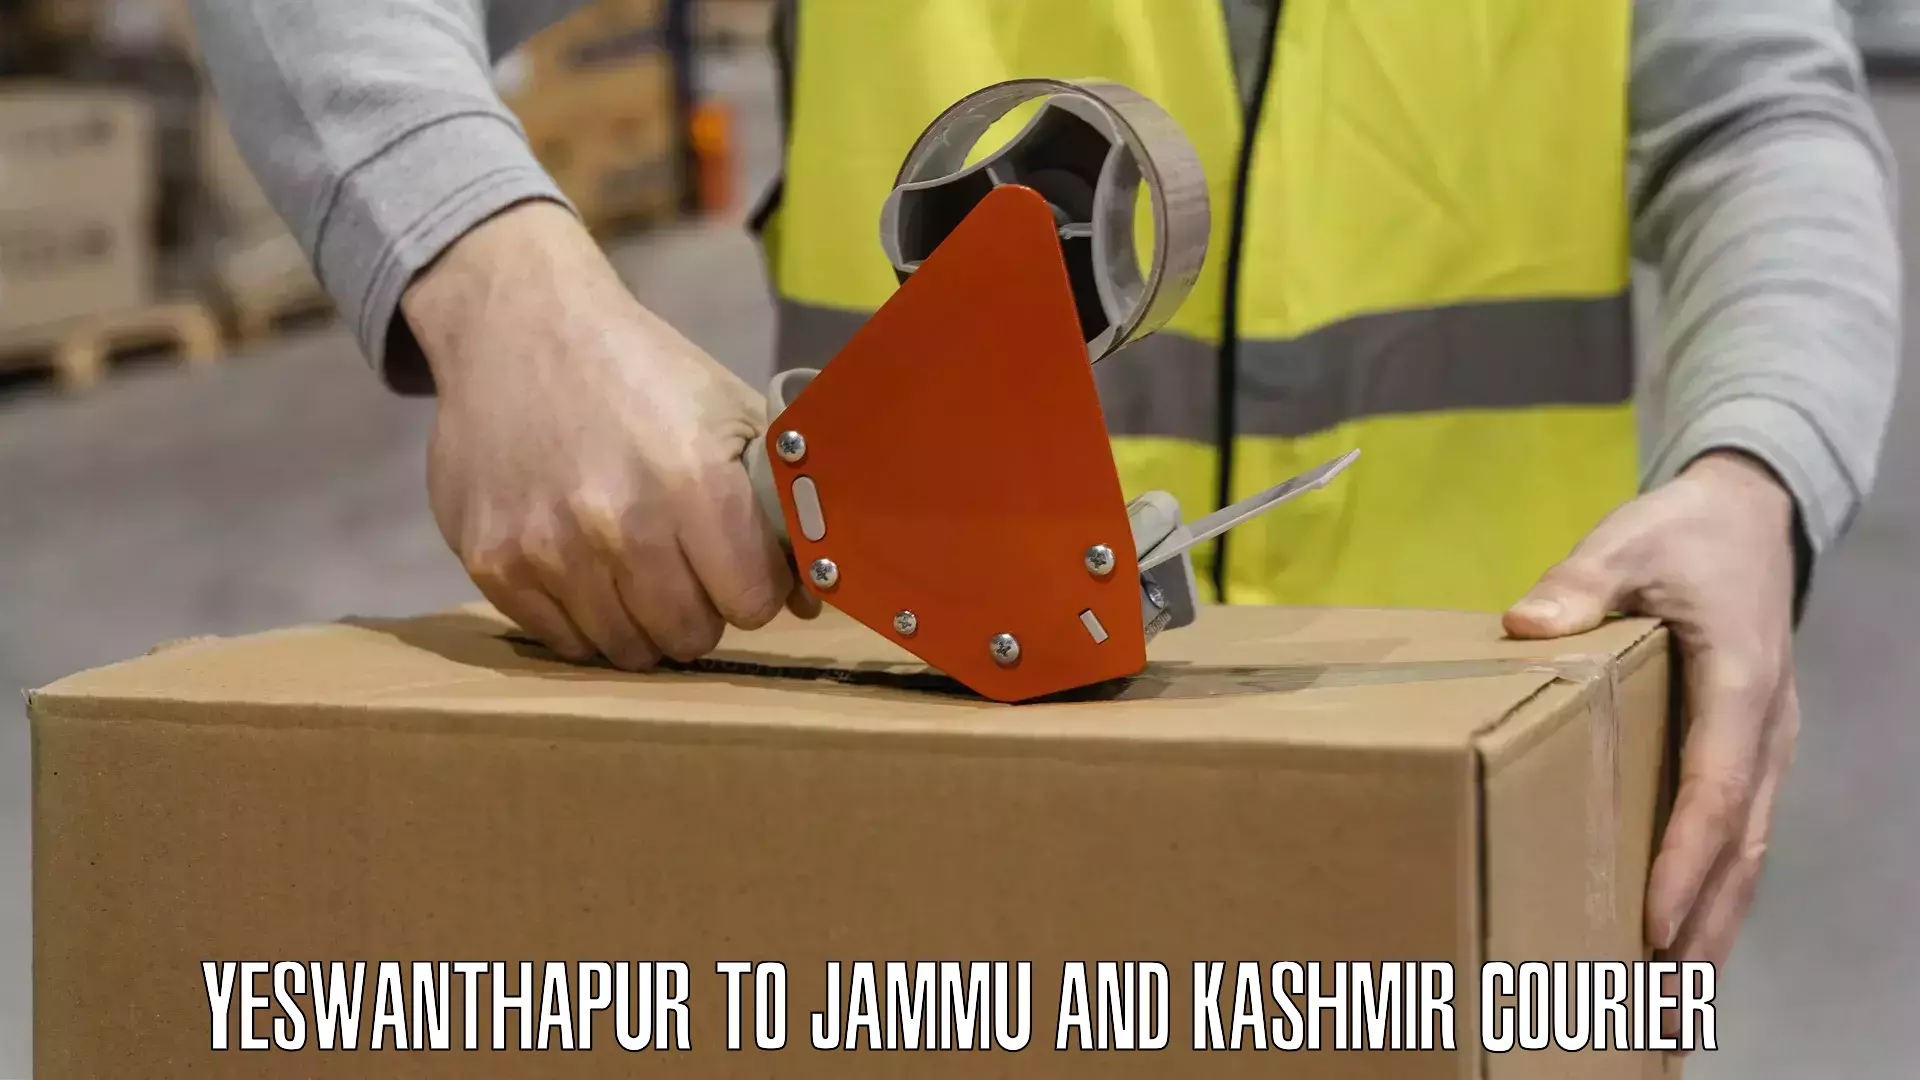 Nationwide shipping capabilities Yeswanthapur to Jammu